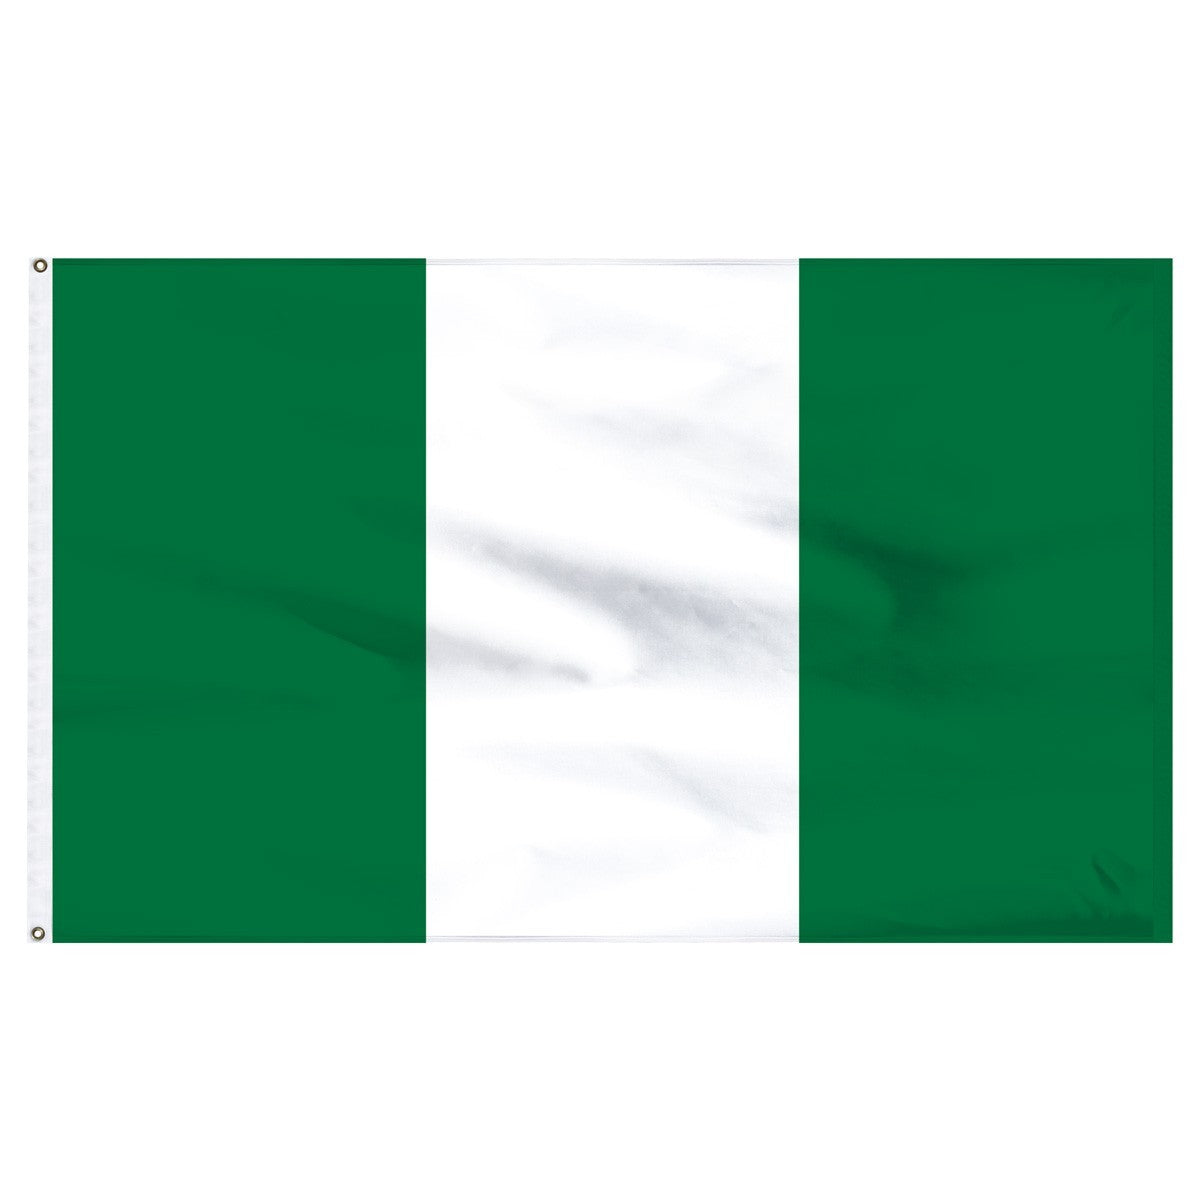 Nigeria flags for sale 1-800 flags